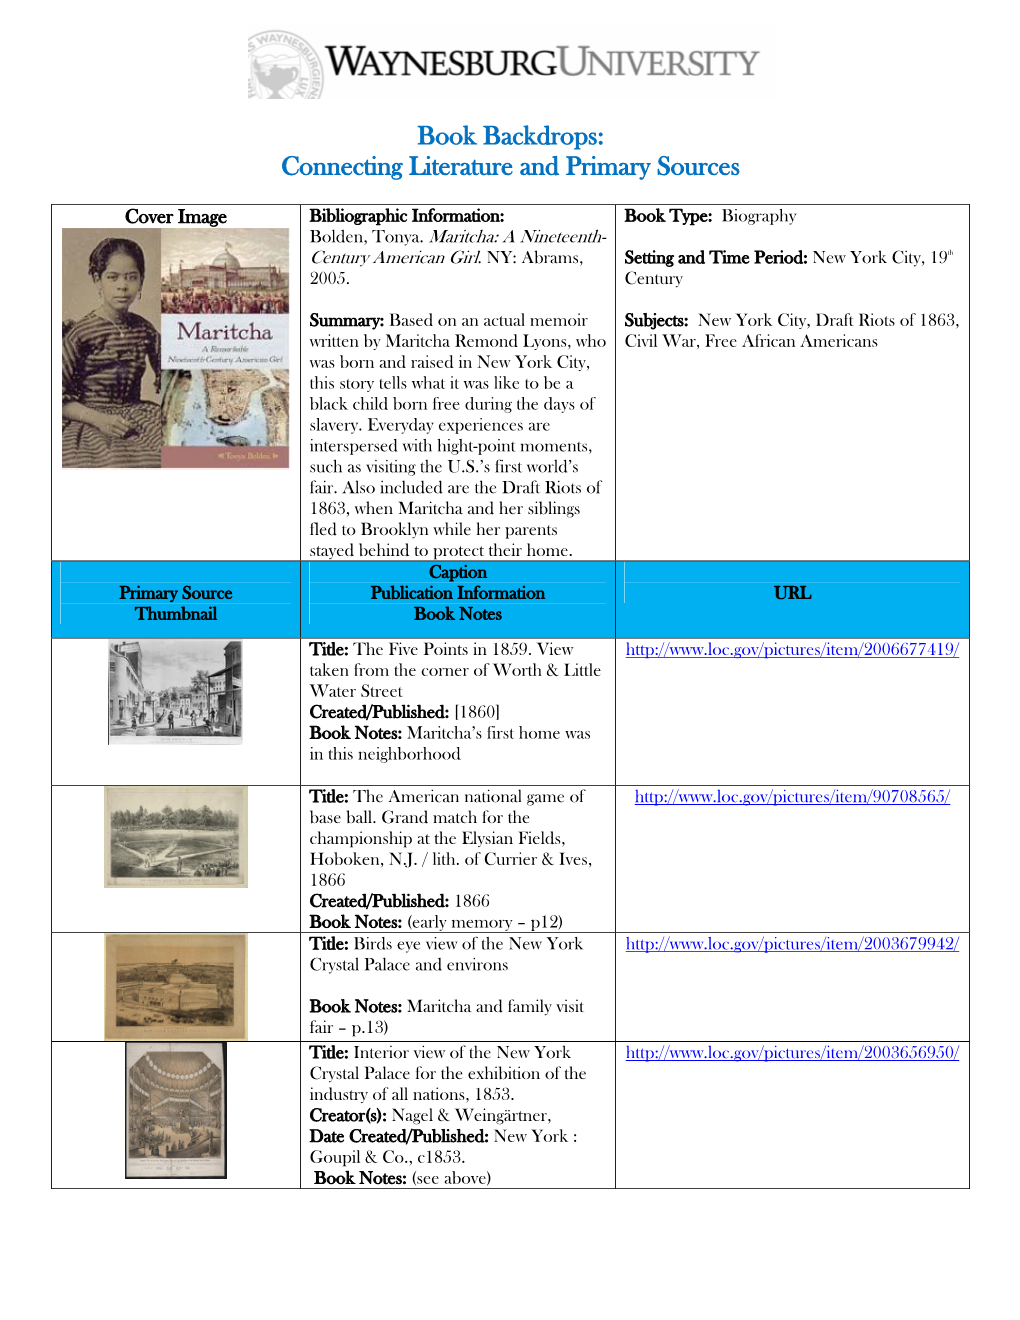 Book Backdrops: Connecting Literature and Primary Sources